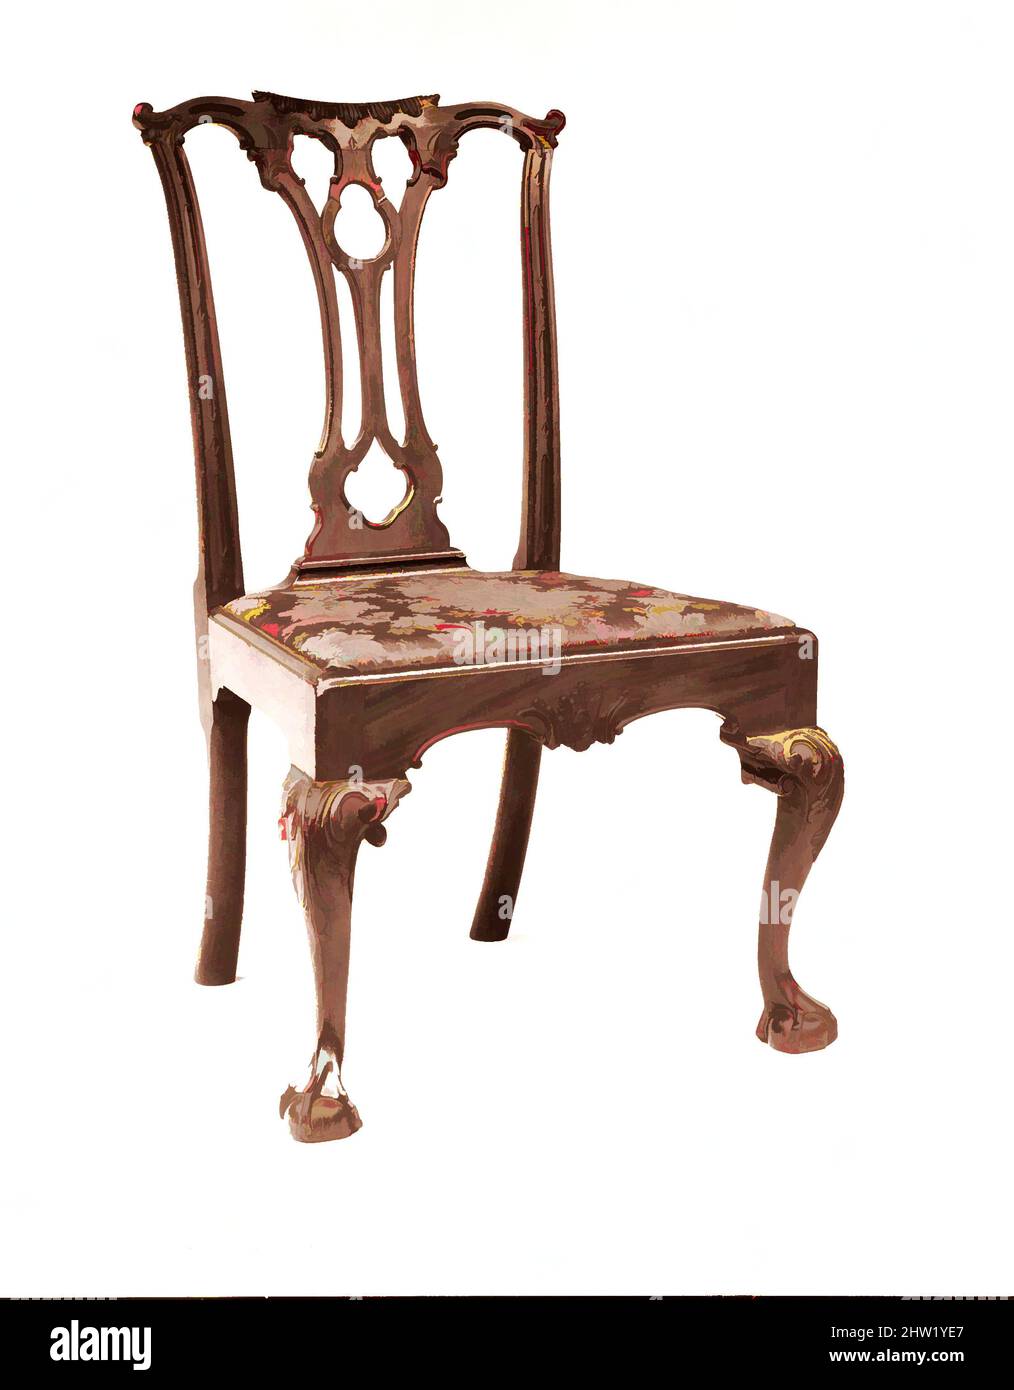 Art inspired by Side chair, 1760–90, Made in Philadelphia, Pennsylvania, United States, American, Mahogany, northern white cedar, yellow pine, 38 3/4 x 22 3/8 x 21 1/2 in. (98.4 x 56.8 x 54.6 cm), Furniture, Chairs with trefoil-pierced splats enjoyed great popularity in Philadelphia, Classic works modernized by Artotop with a splash of modernity. Shapes, color and value, eye-catching visual impact on art. Emotions through freedom of artworks in a contemporary way. A timeless message pursuing a wildly creative new direction. Artists turning to the digital medium and creating the Artotop NFT Stock Photo